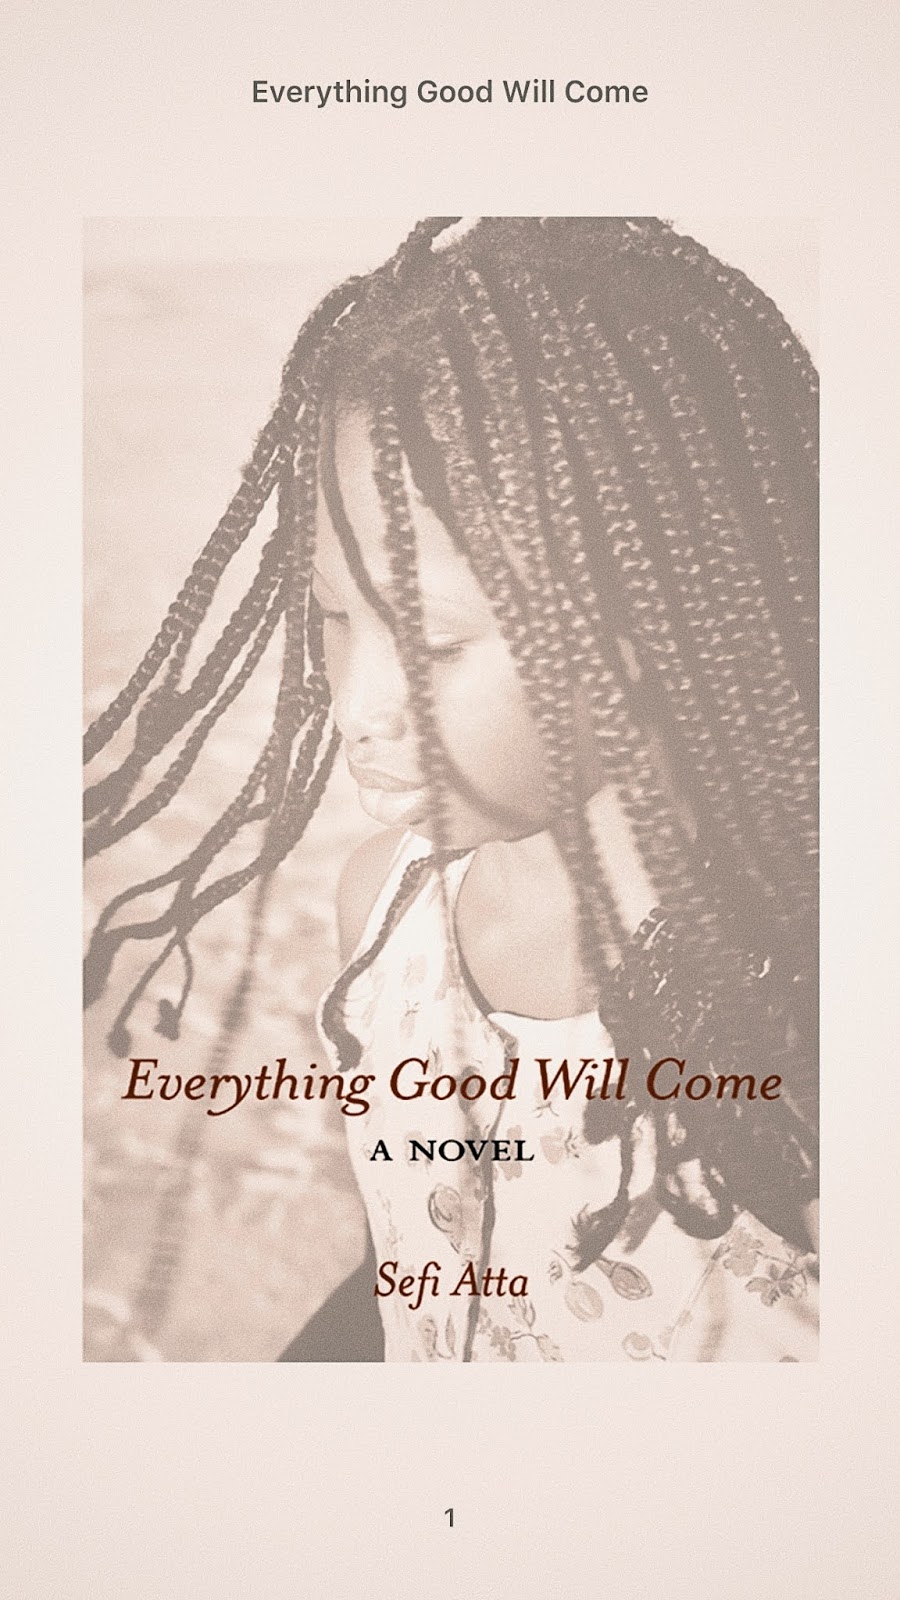 BOOK REVIEW: EVERYTHING GOOD WILL COME